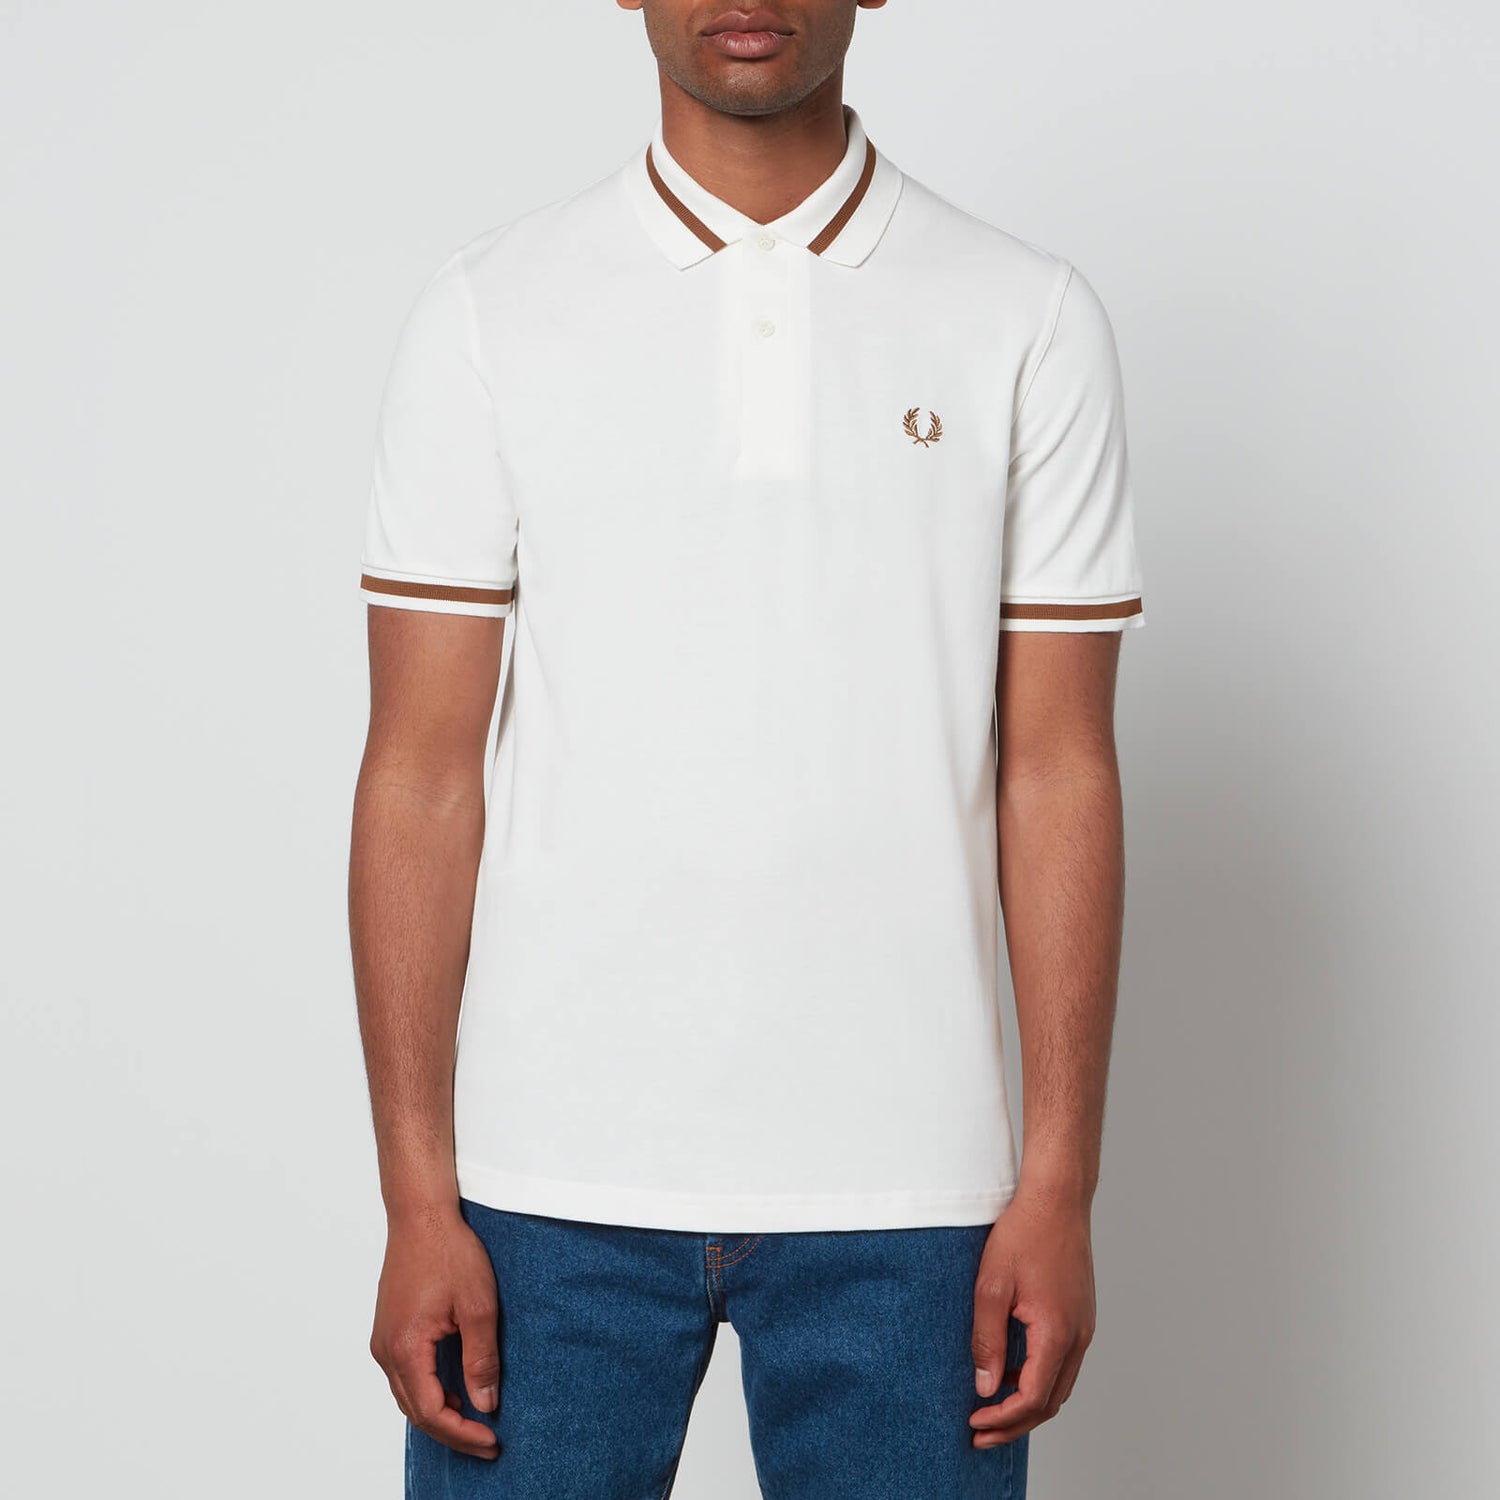 Fred Perry Men's Single Tipped Polo Shirt - Snow White/Dark Caramel - 40/L